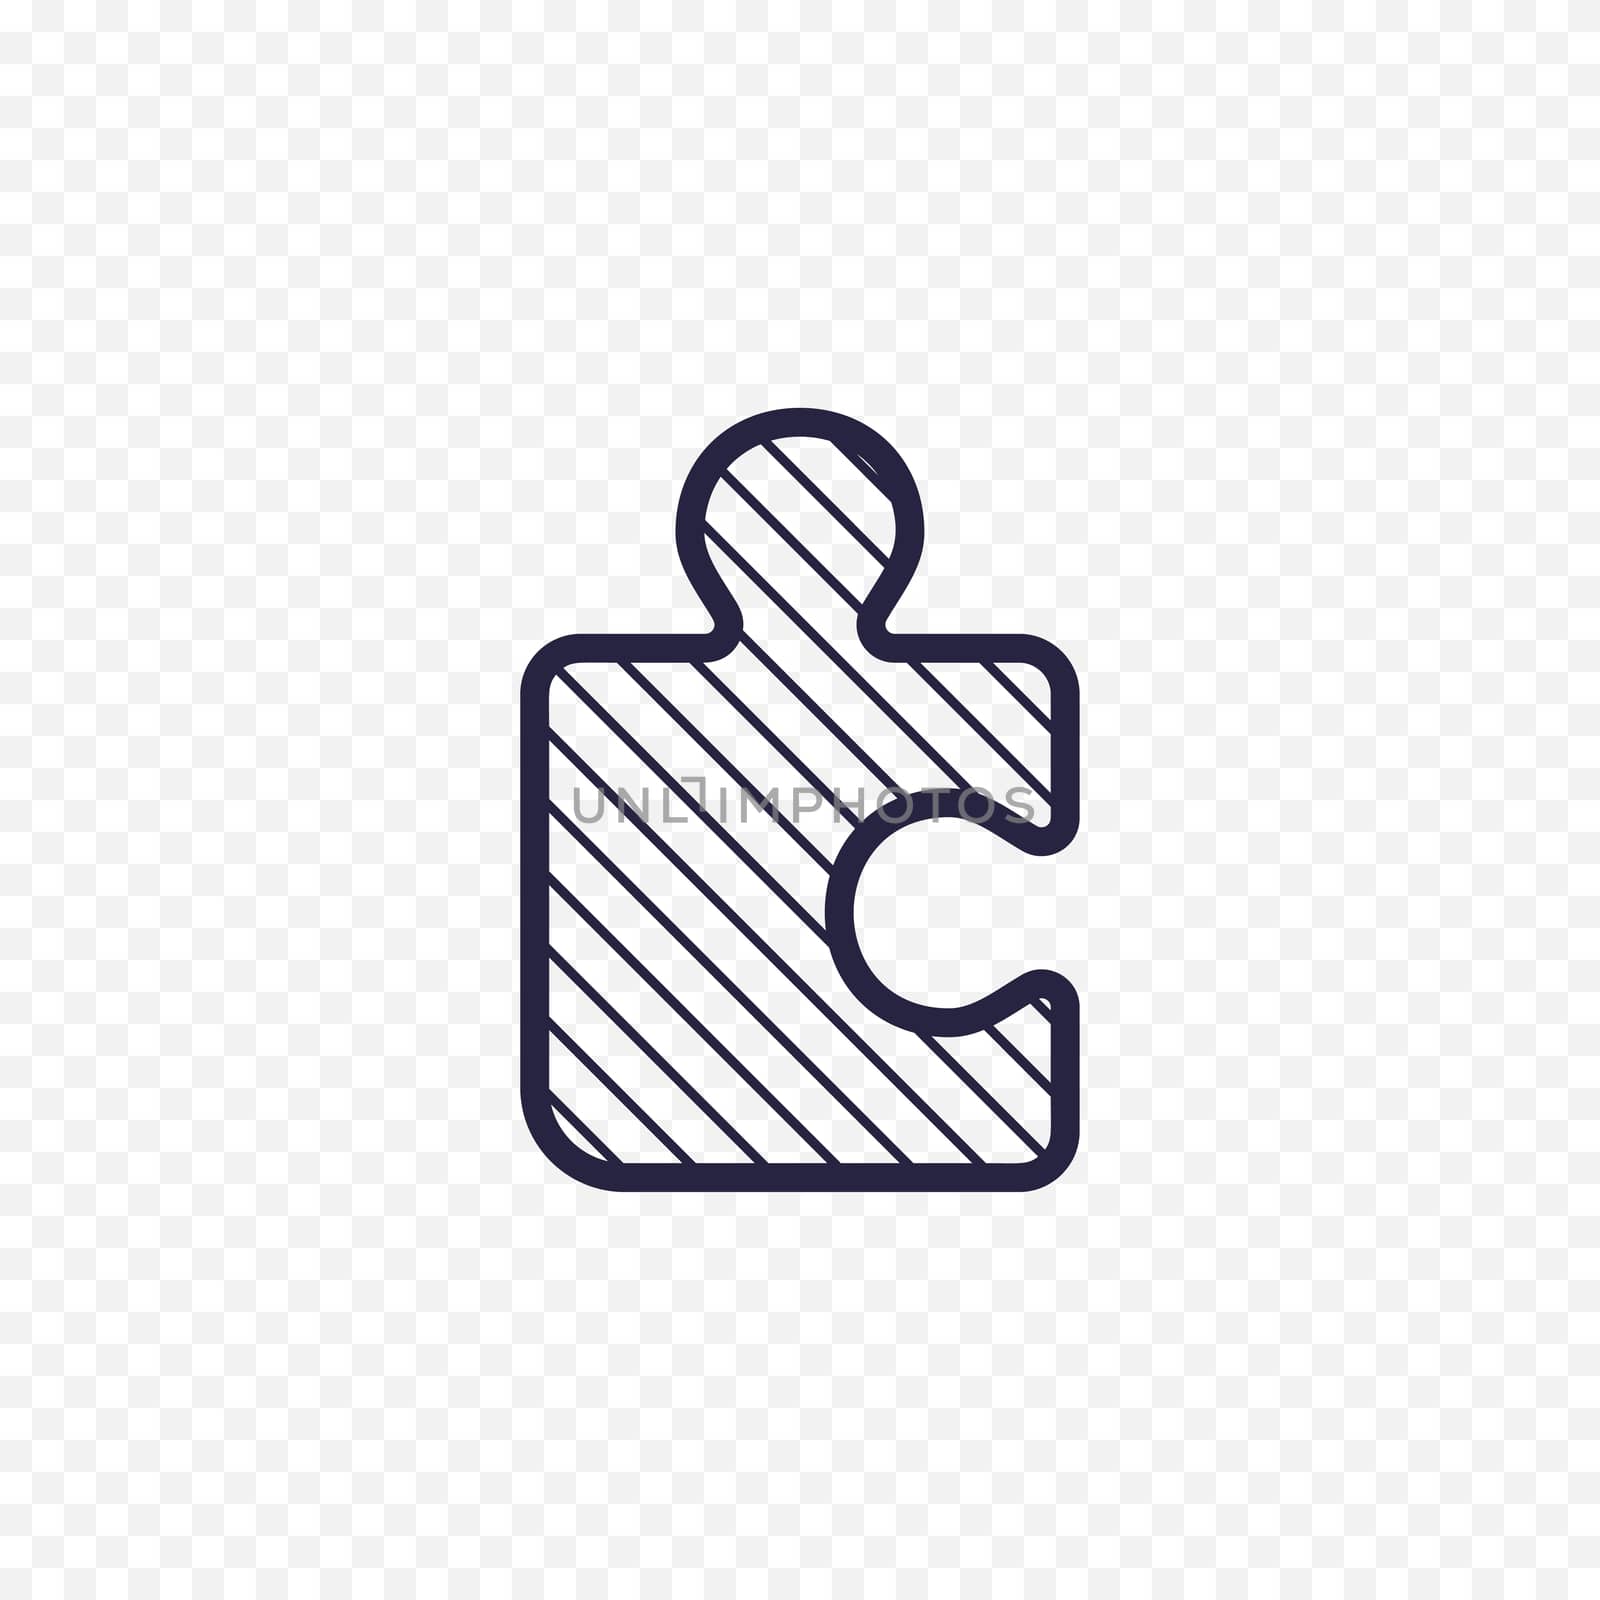 Puzzle game line icon. Jigsaw piece thin linear signs. Outline solution simple concept for websites, infographic, mobile applications. by Elena_Garder